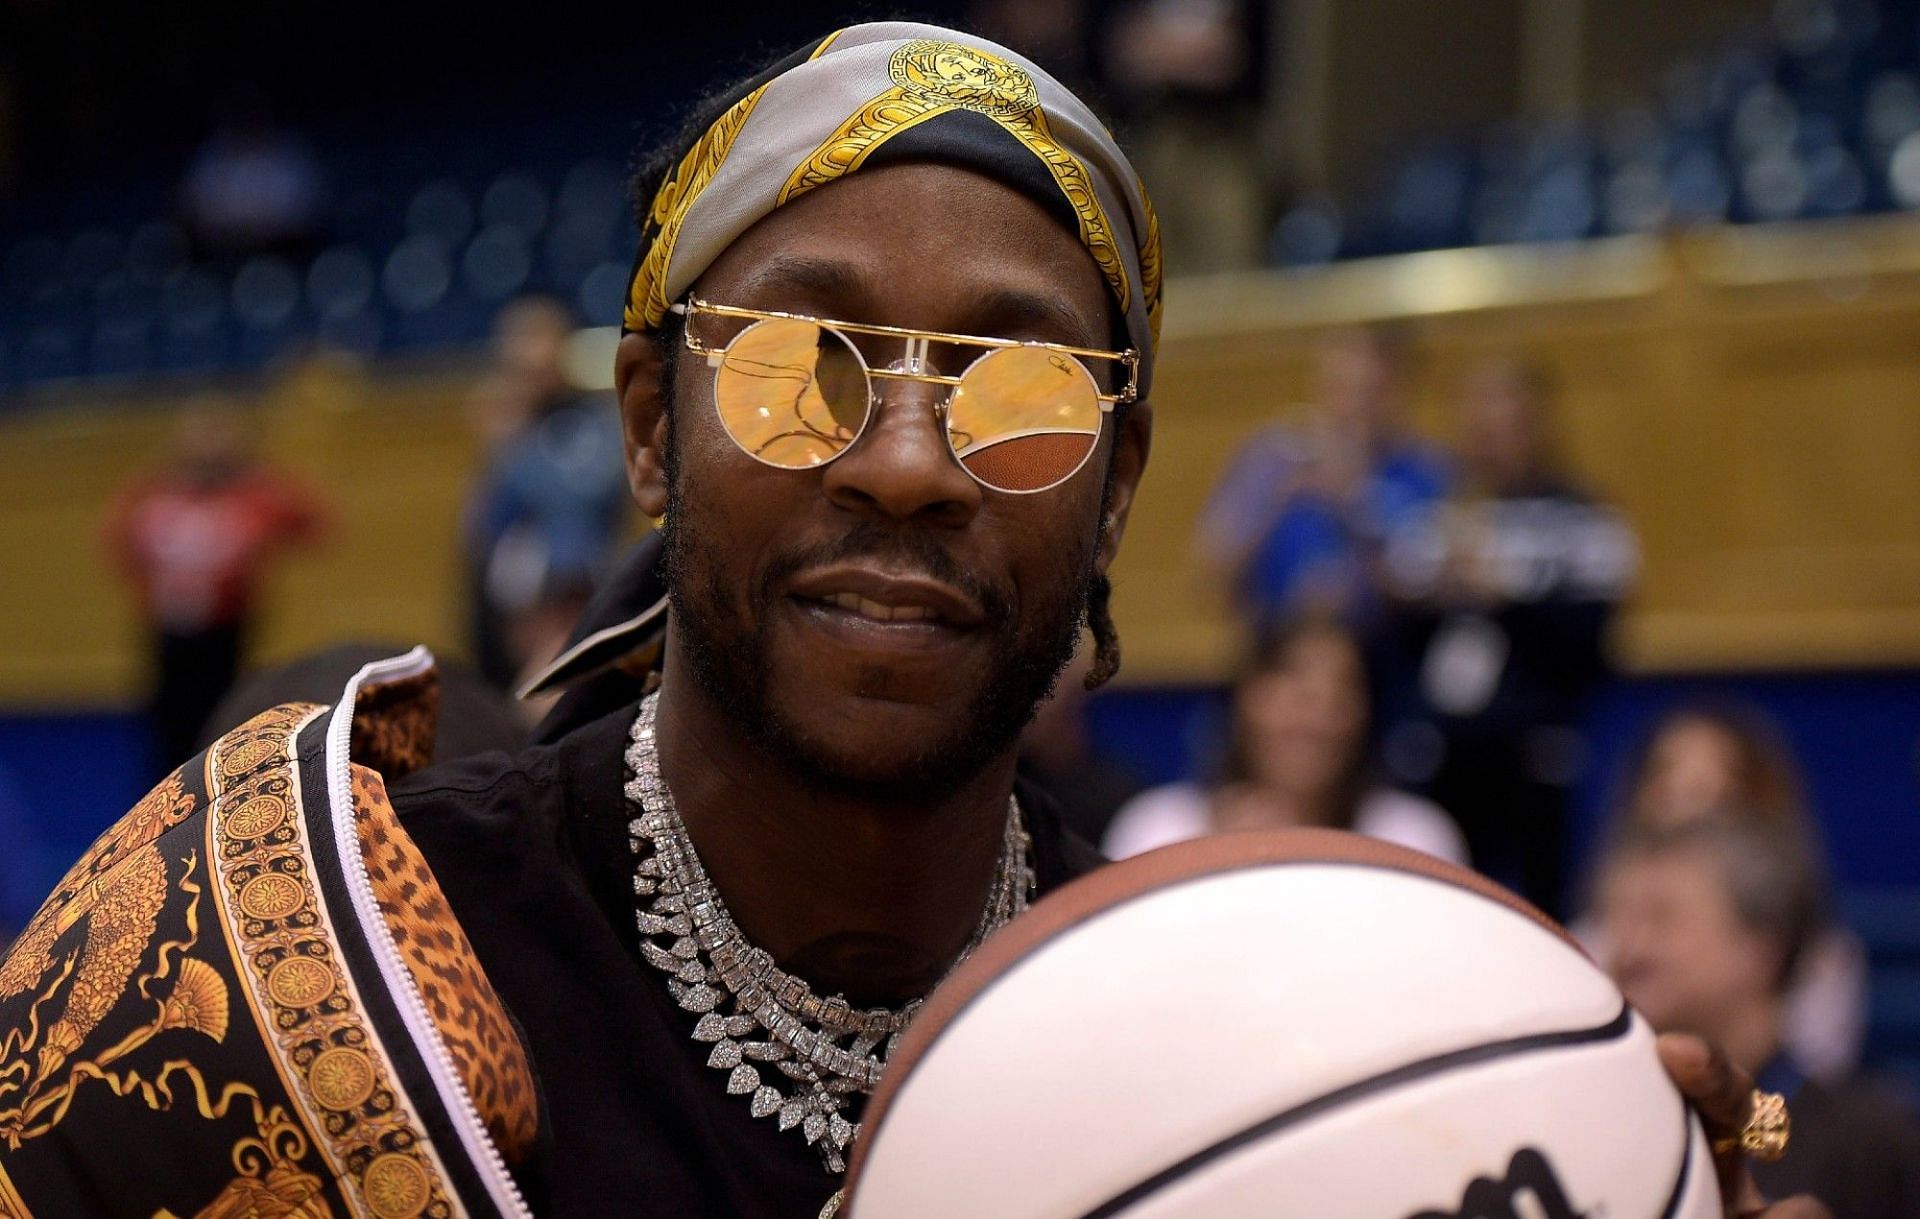 Rapper 2 Chainz in the documentary &#039;2 Chainz Full Circle&#039; [Source: NME]